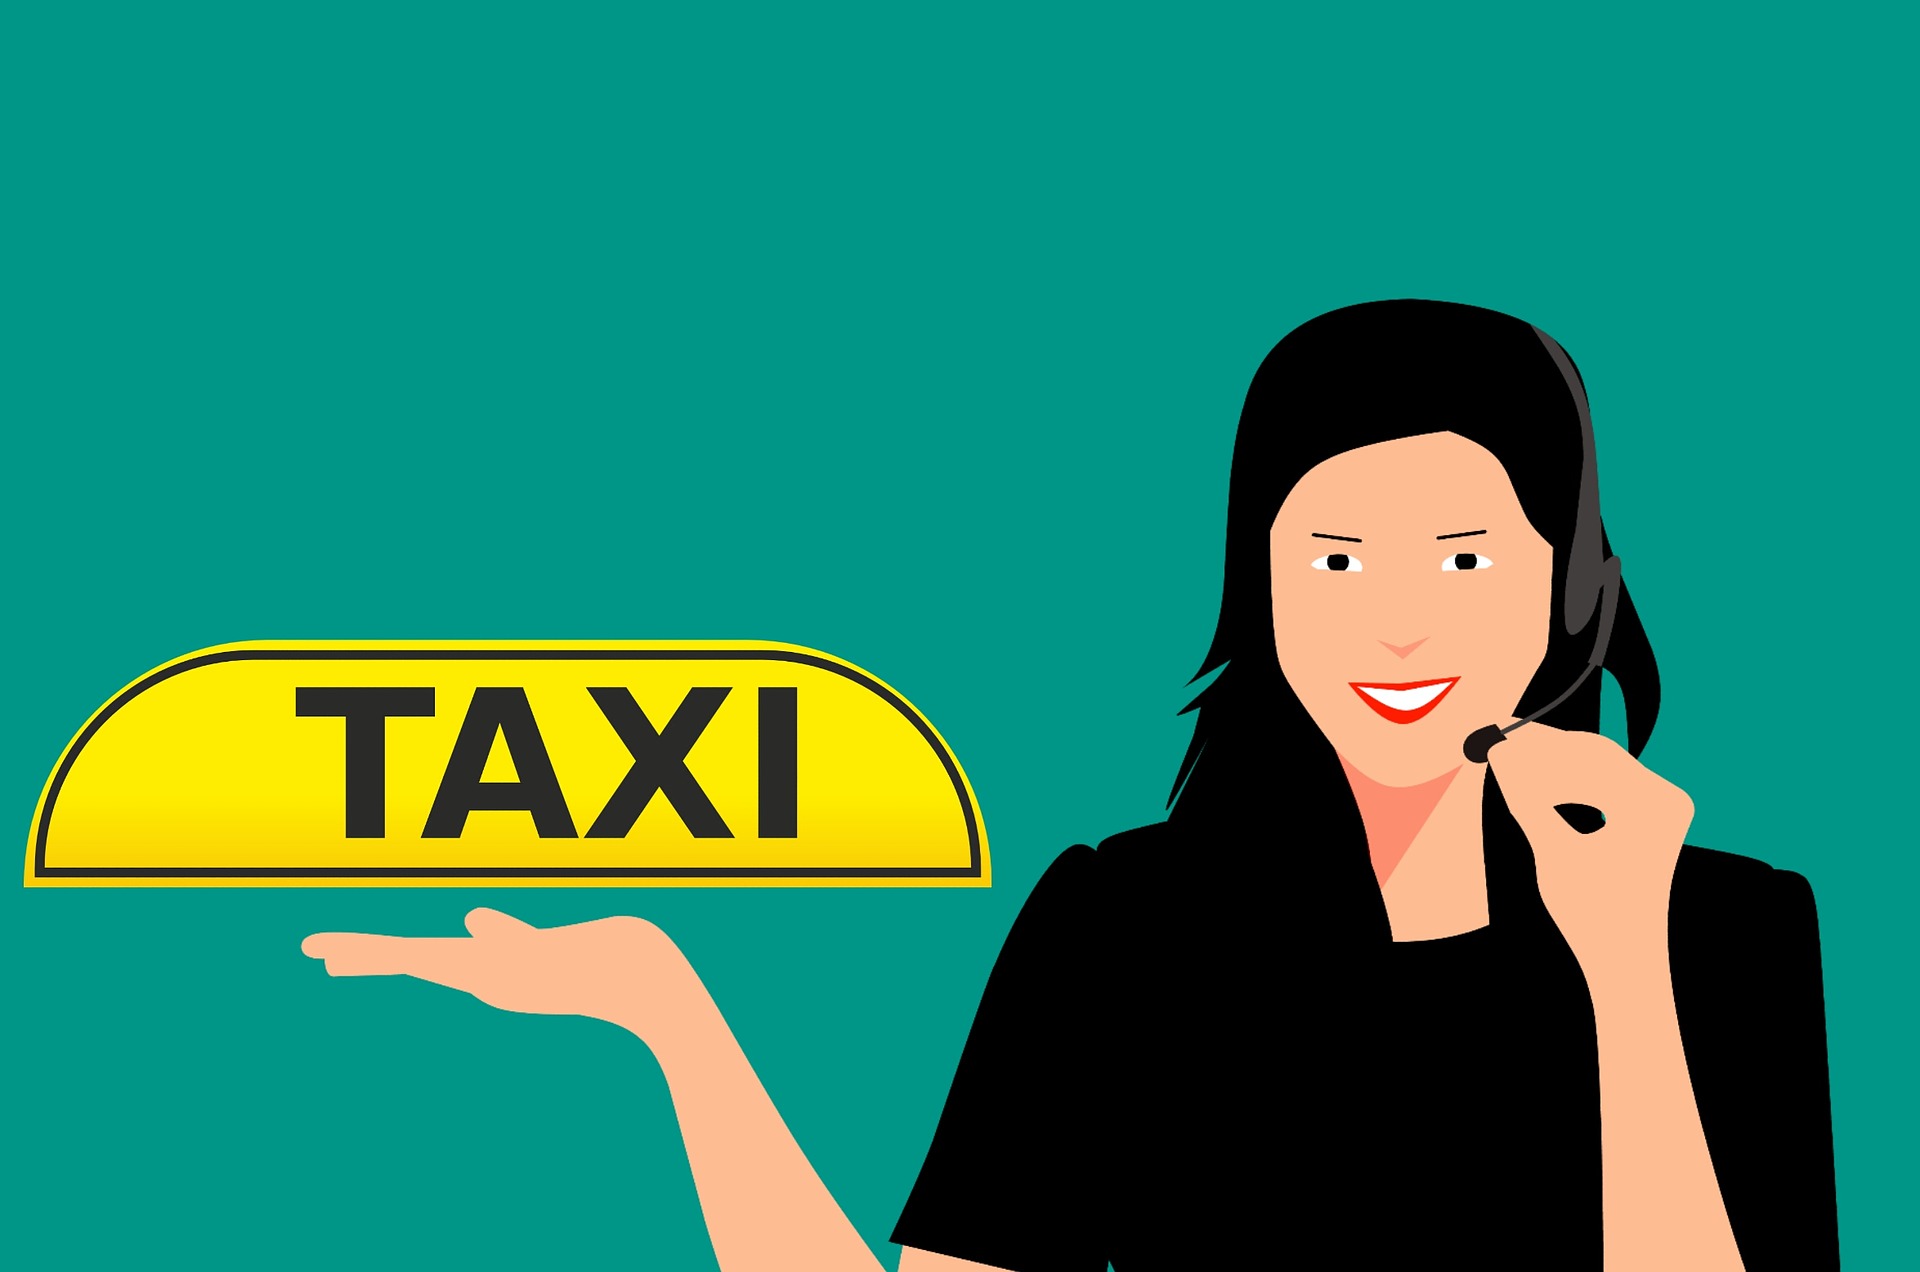 Taxi-Booking App